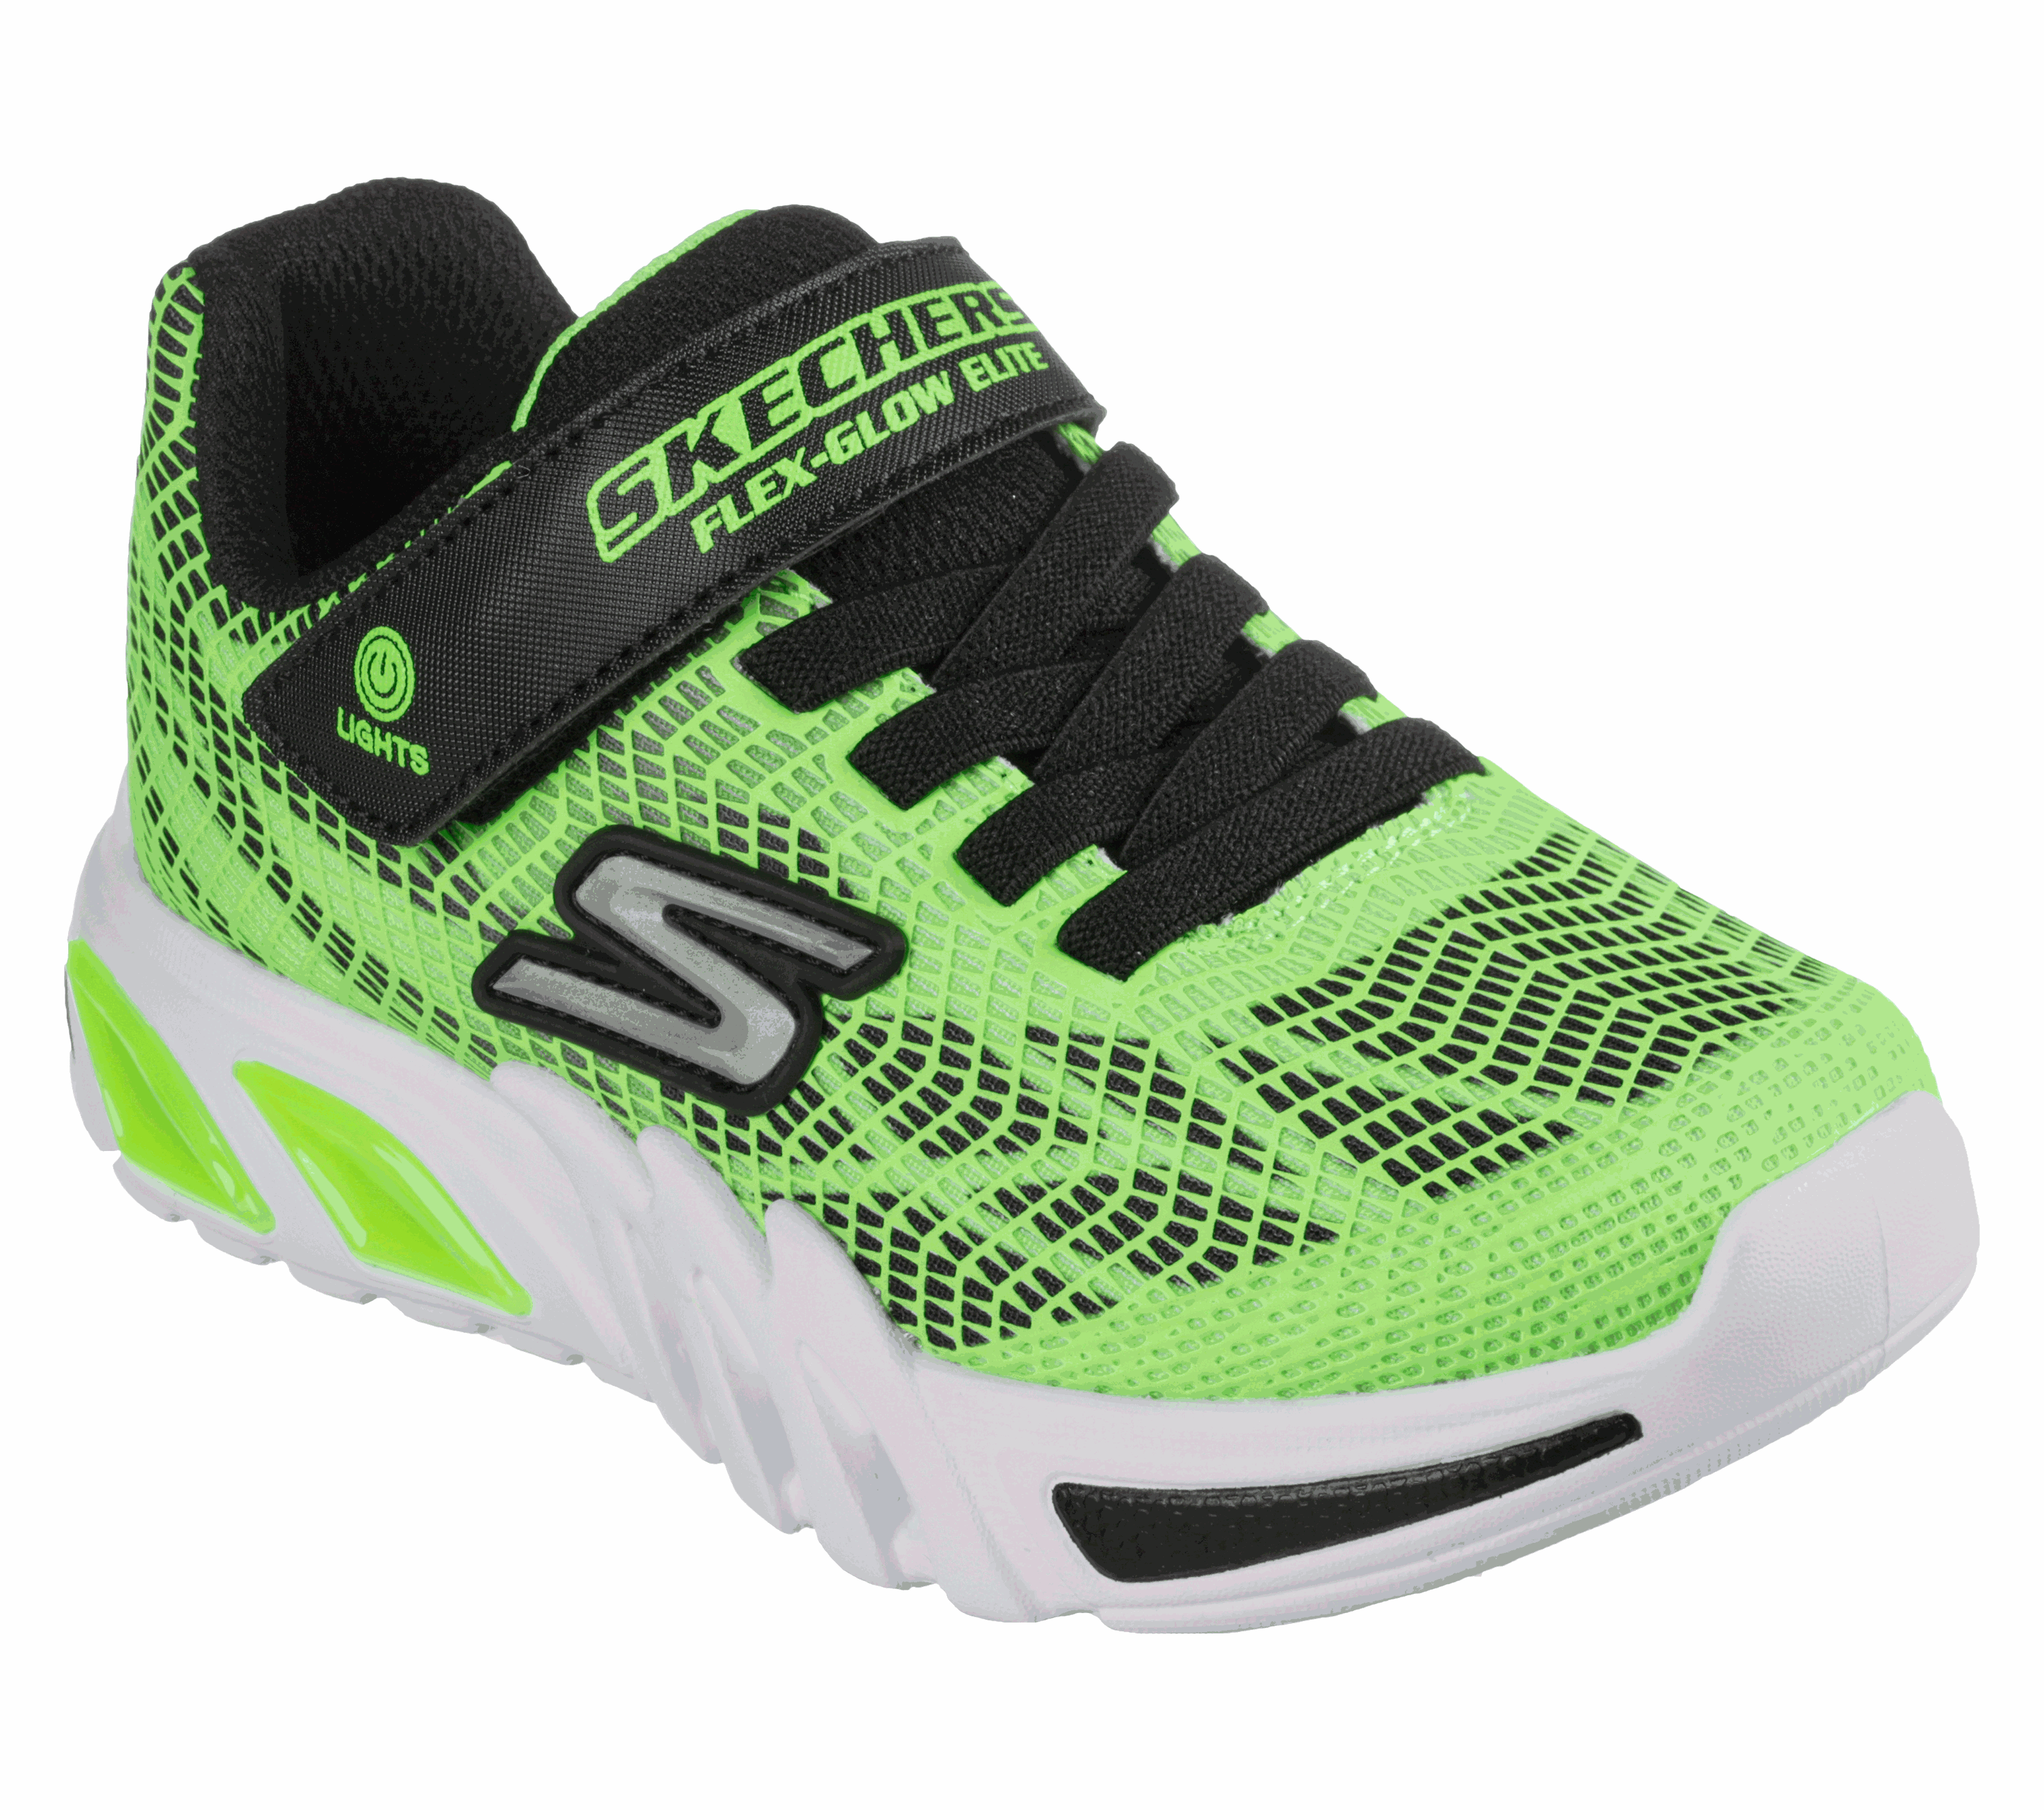 skechers light up shoes directions